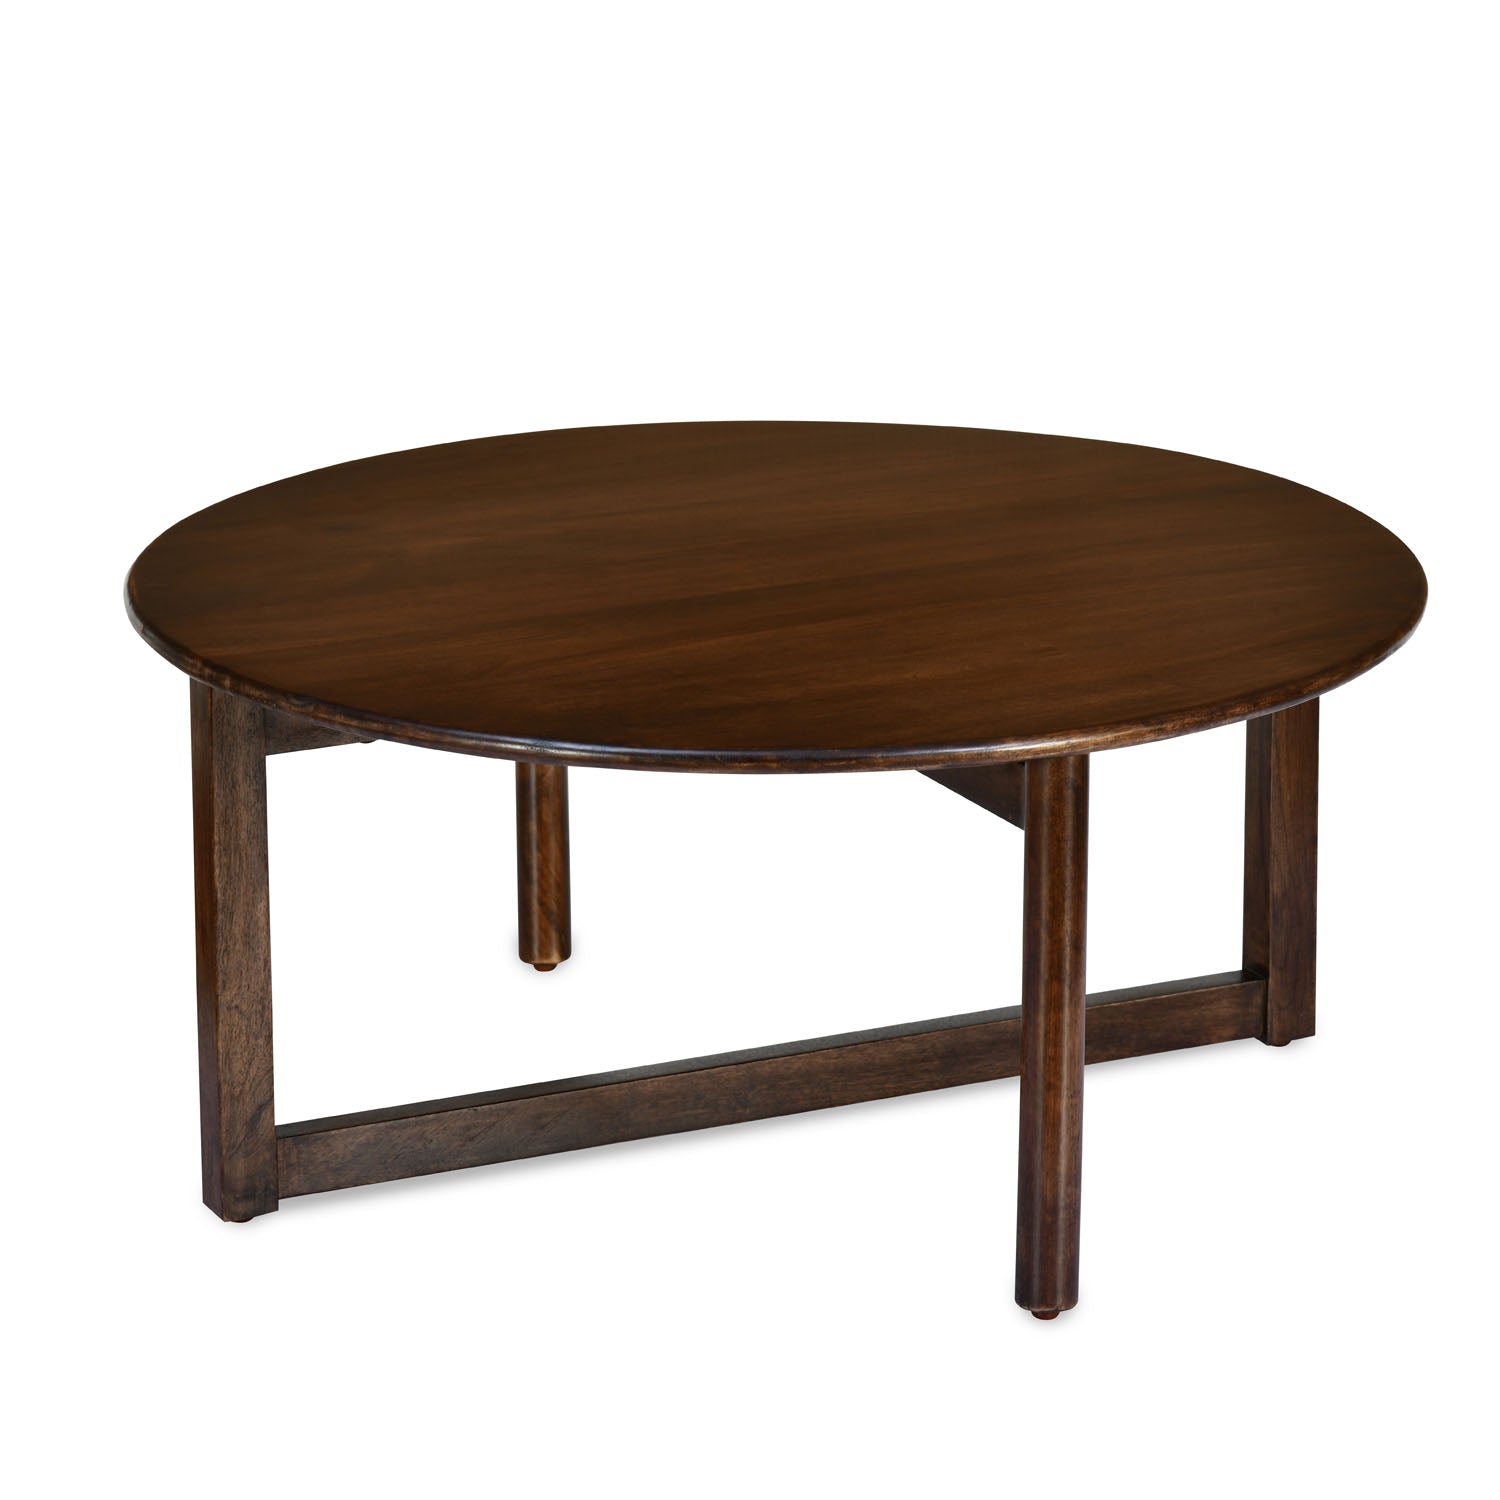 Crater Solid Wood Center Table (Walnut)